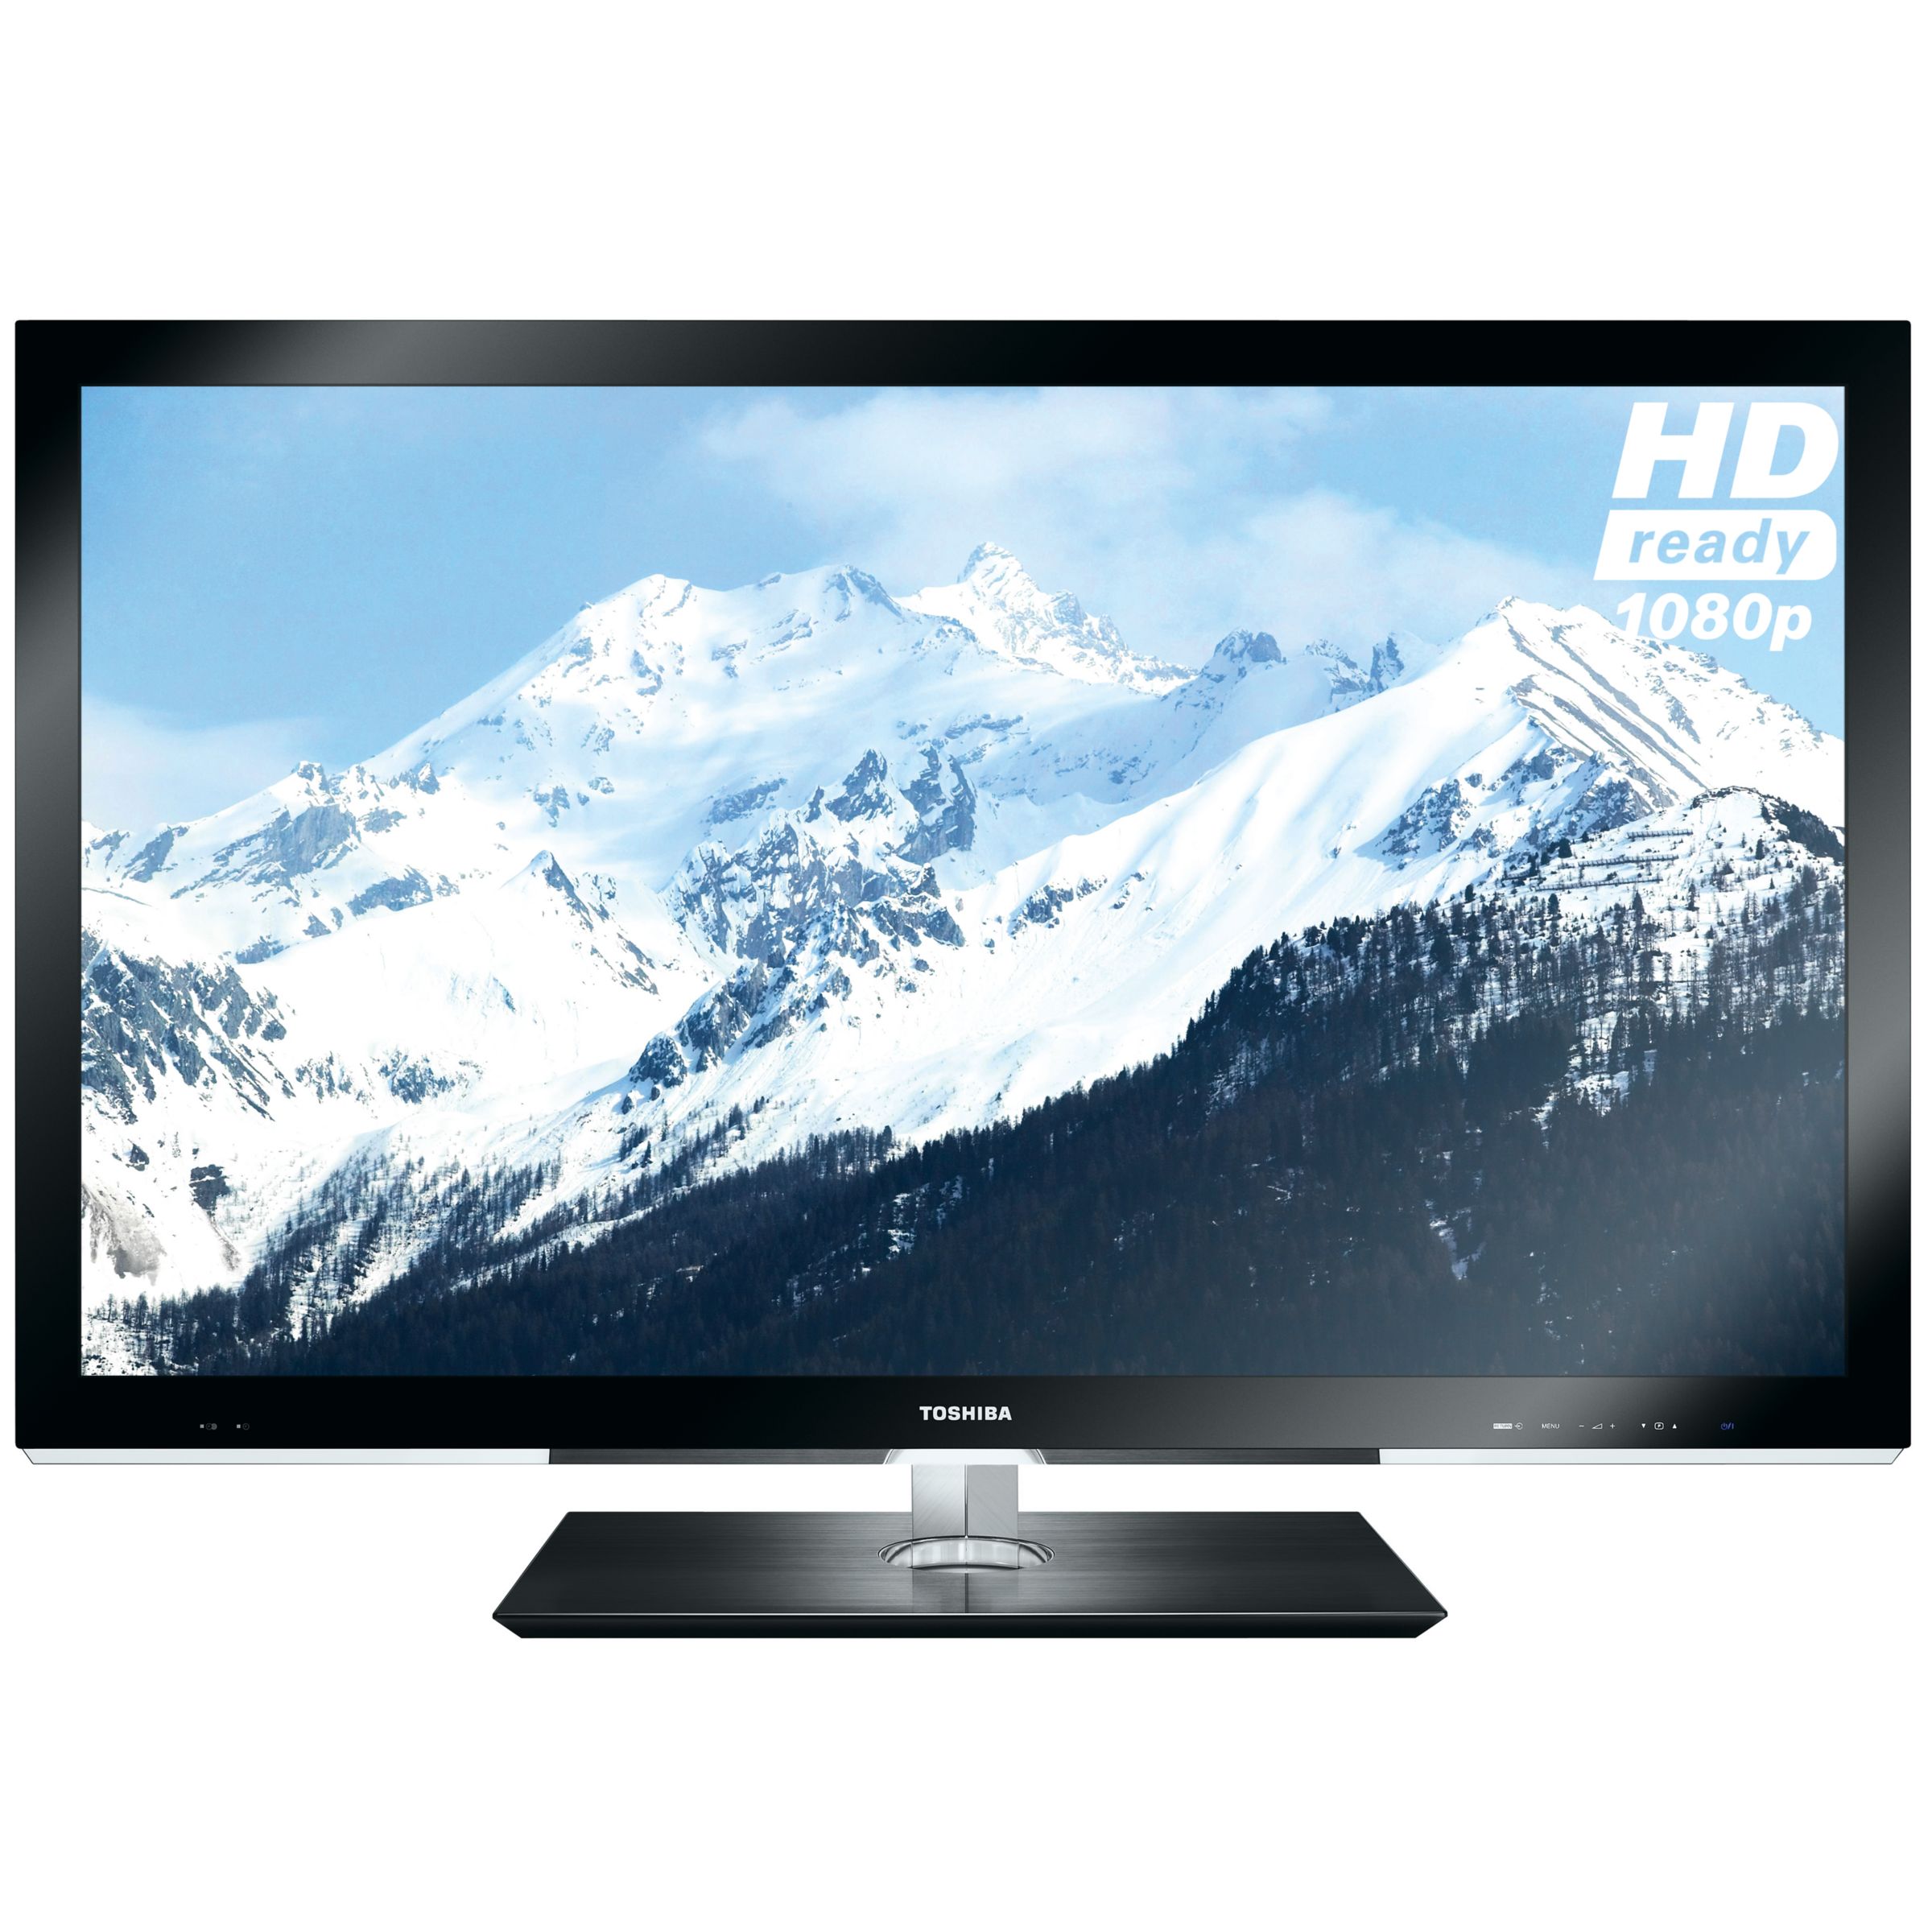 Toshiba Regza 46WL768 LED HD 1080p 3D TV, 46", Freeview HD with FREE 3D Blu-ray Player at John Lewis